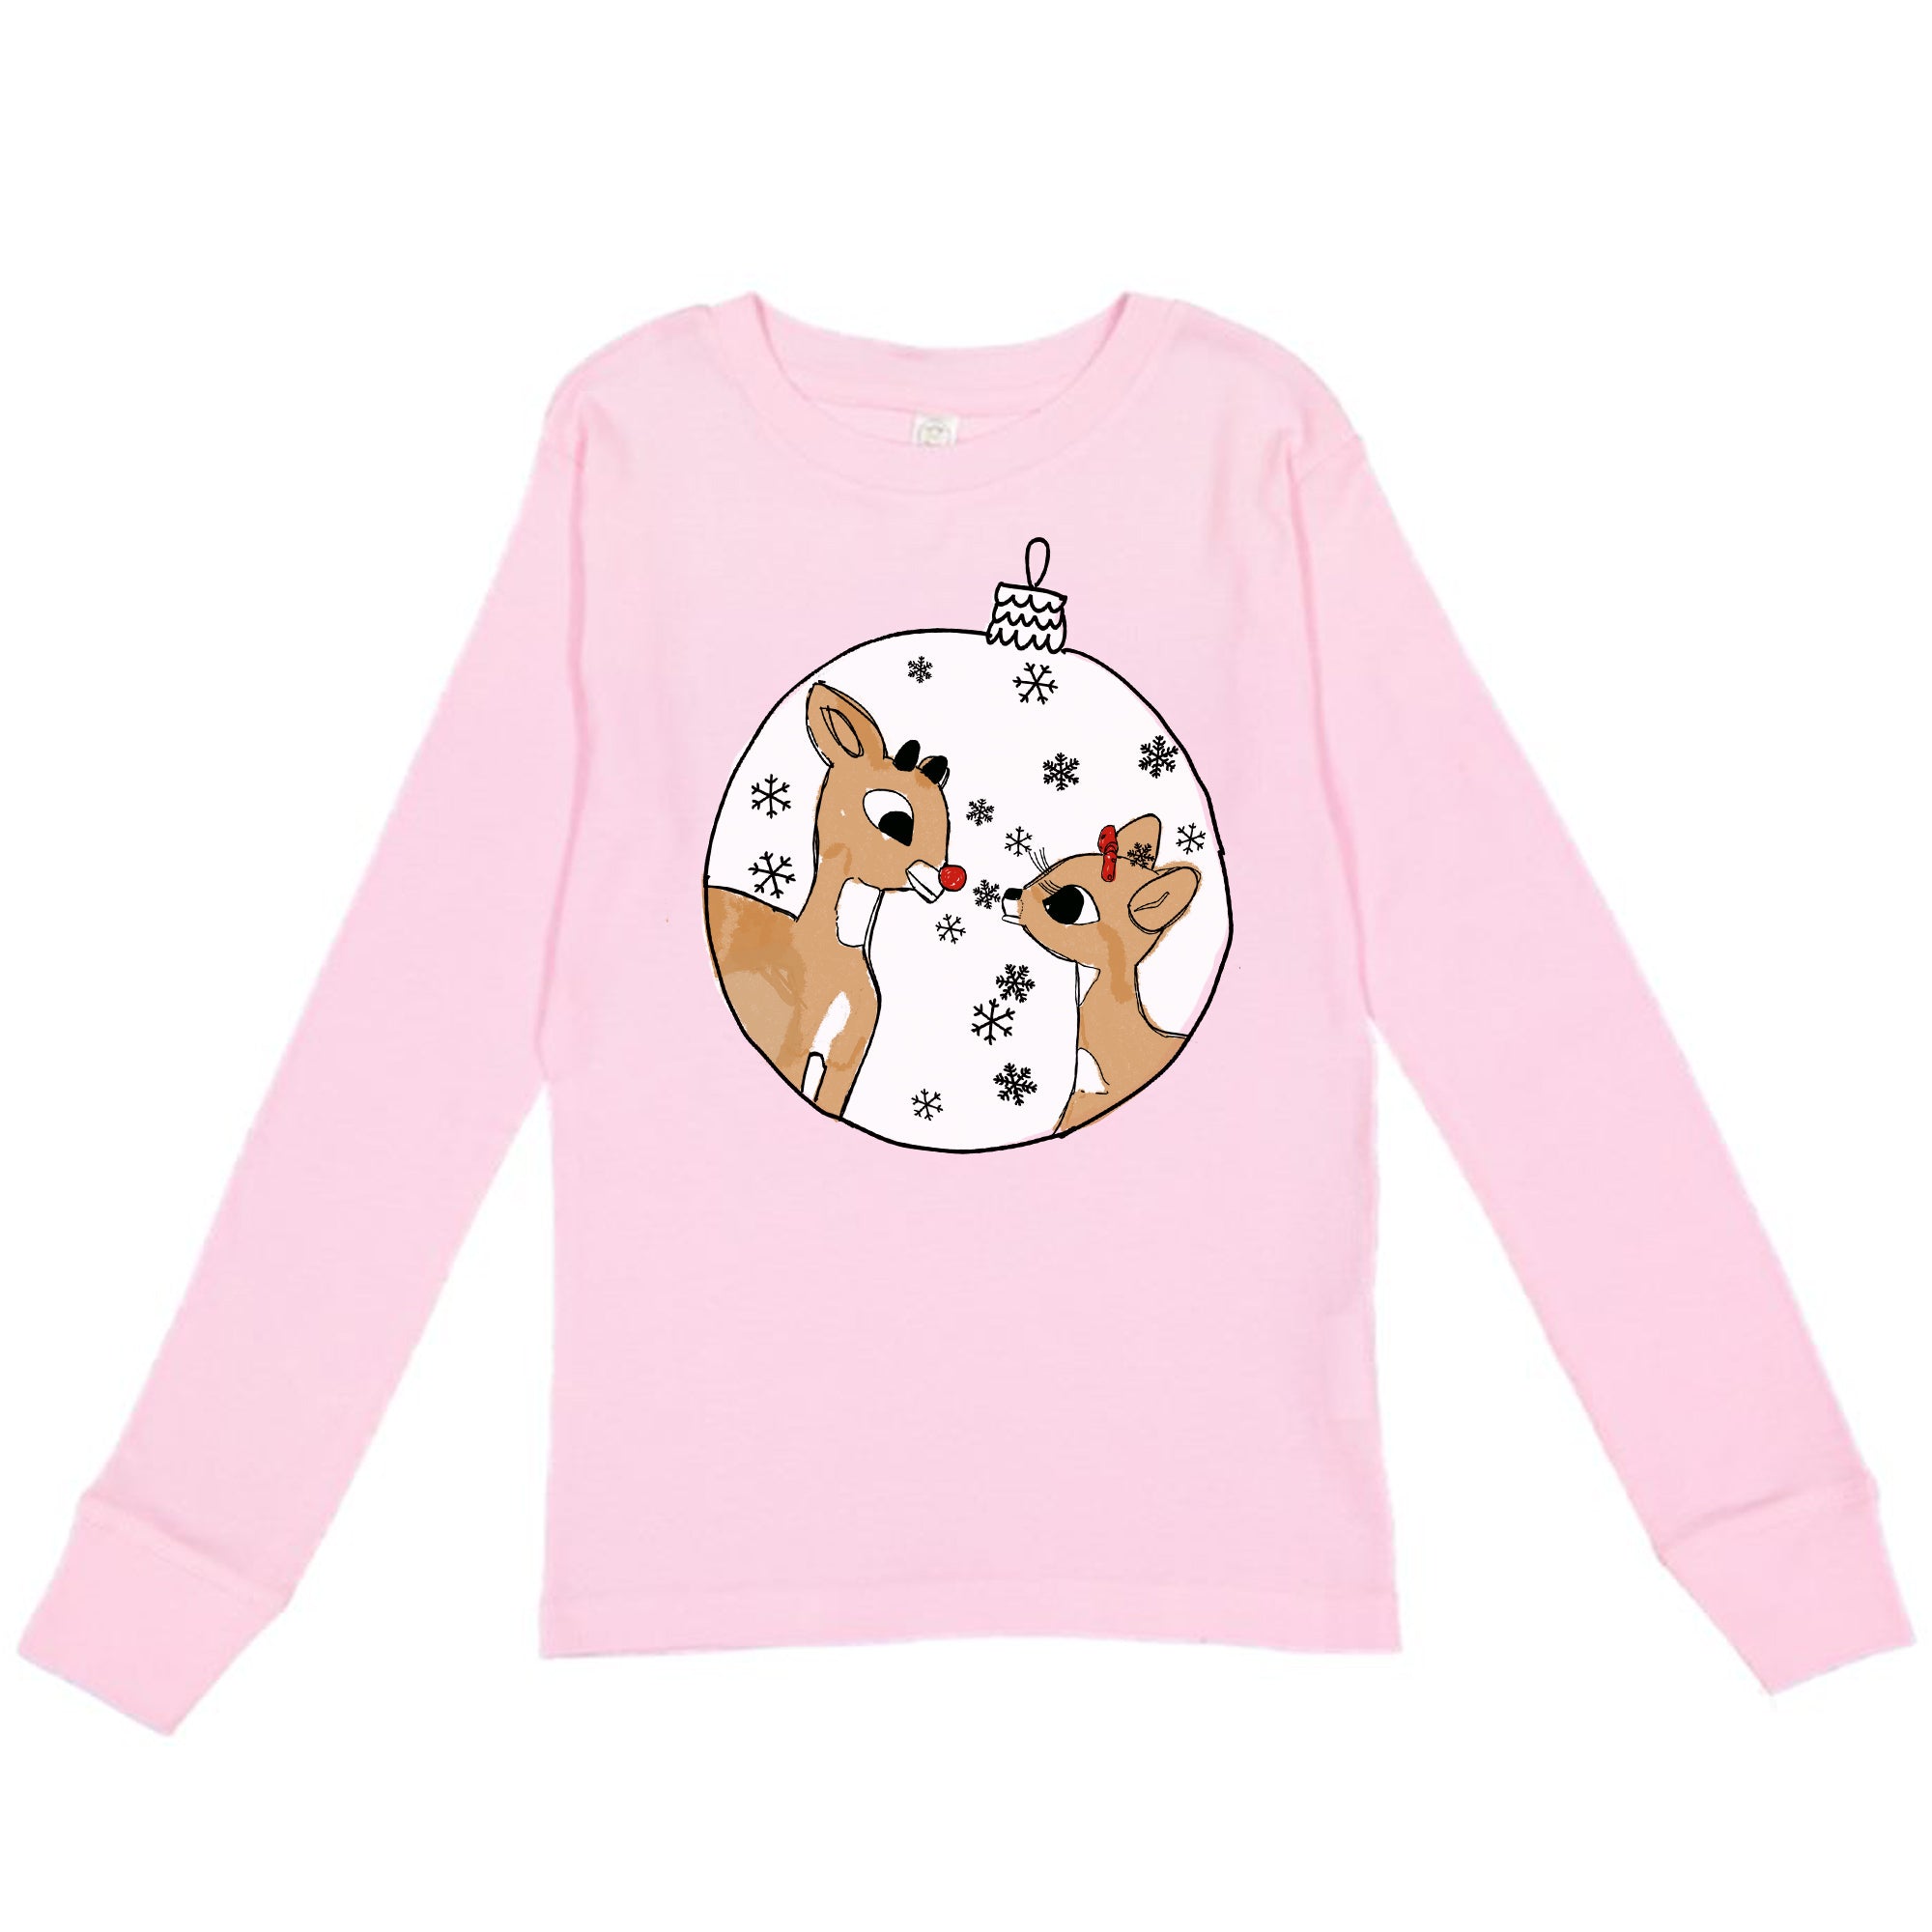 Youth Holiday Pajamas - More styles available